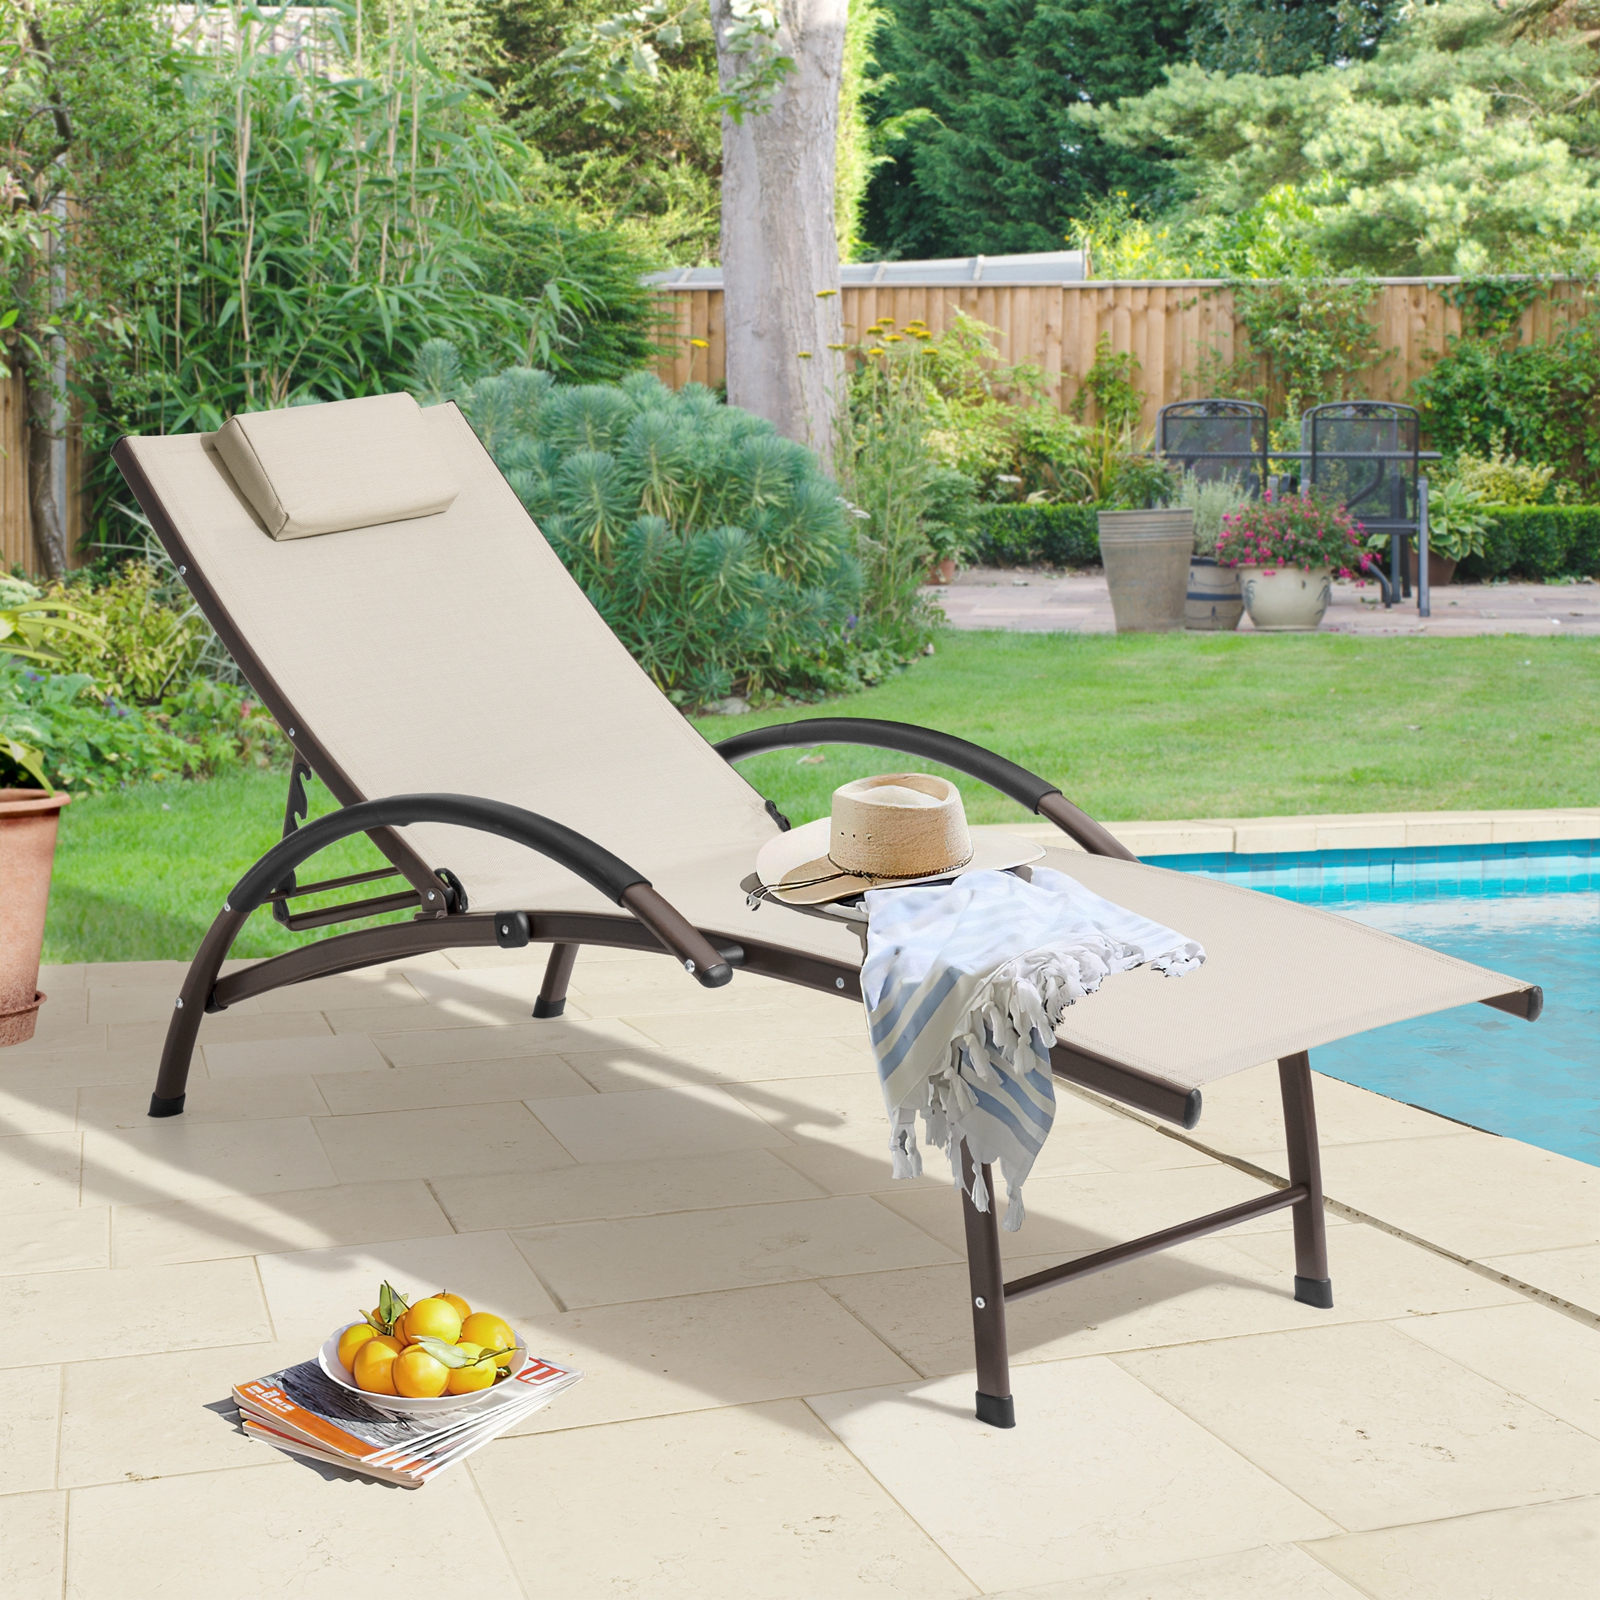 Crestlive Products Aluminum Outdoor Folding Reclining Chaise Lounge Chair in Tan - image 2 of 7